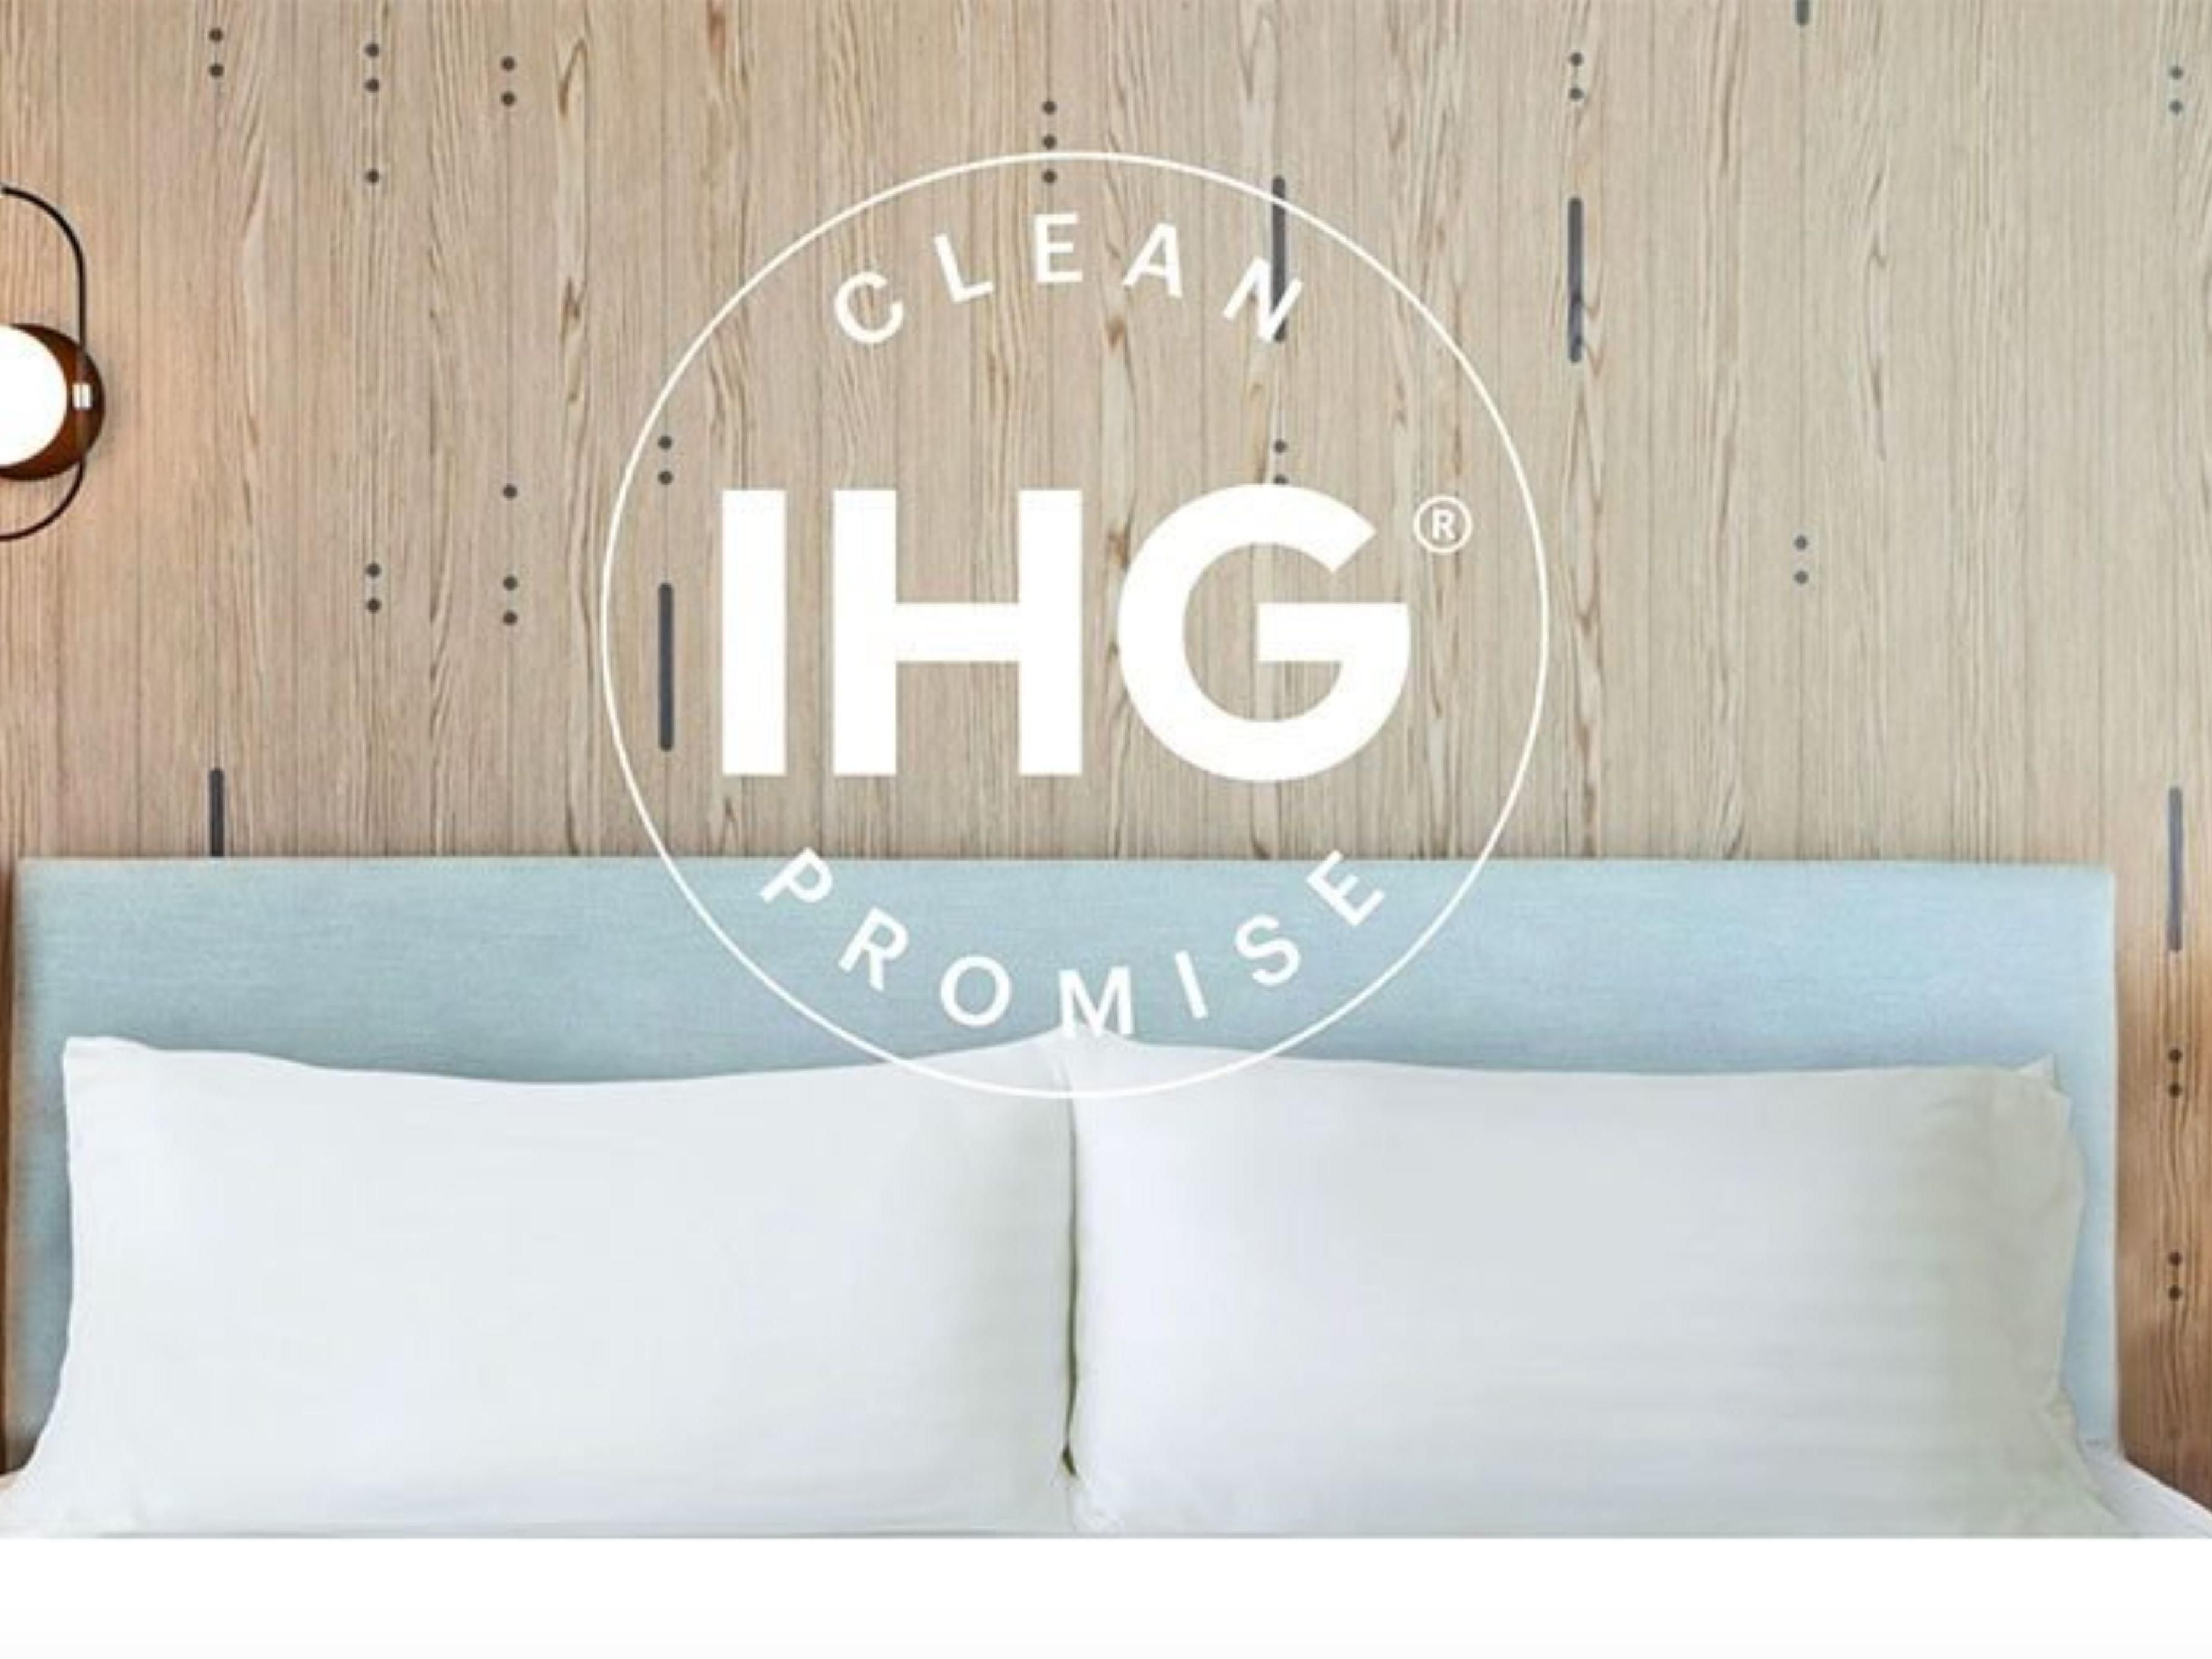 IHG Way of Clean already includes deep cleaning with hospital-grade disinfectants, and guests can expect to see evolved procedures throughout the hotel, which may include: Reception: Reduced contact at check-in, touch-less transactions, front desk screens, sanitizer stations, sanitized key-cards, paperless check-out.